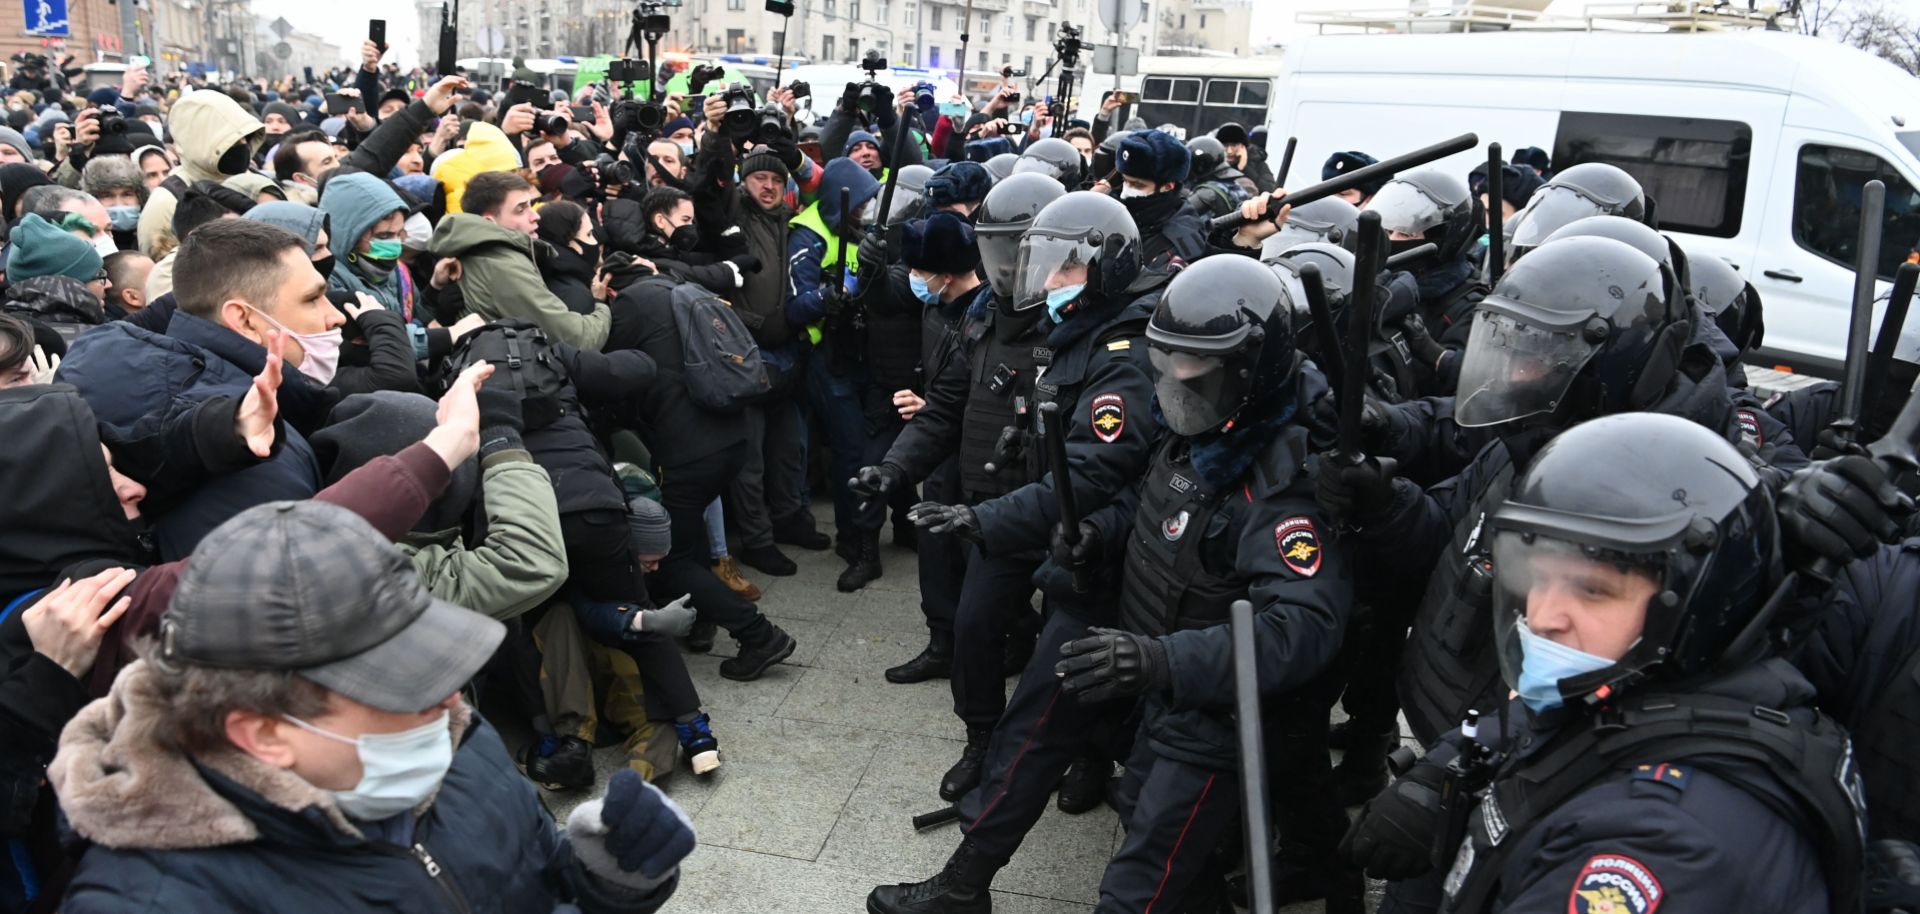 Protesters clash with riot police during a rally in support of jailed opposition leader Alexei Navalny in Moscow, Russia, on Jan. 23, 2021. Navalny was detained upon returning to Moscow after spending five months in Germany recovering from a near-fatal poisoning.  